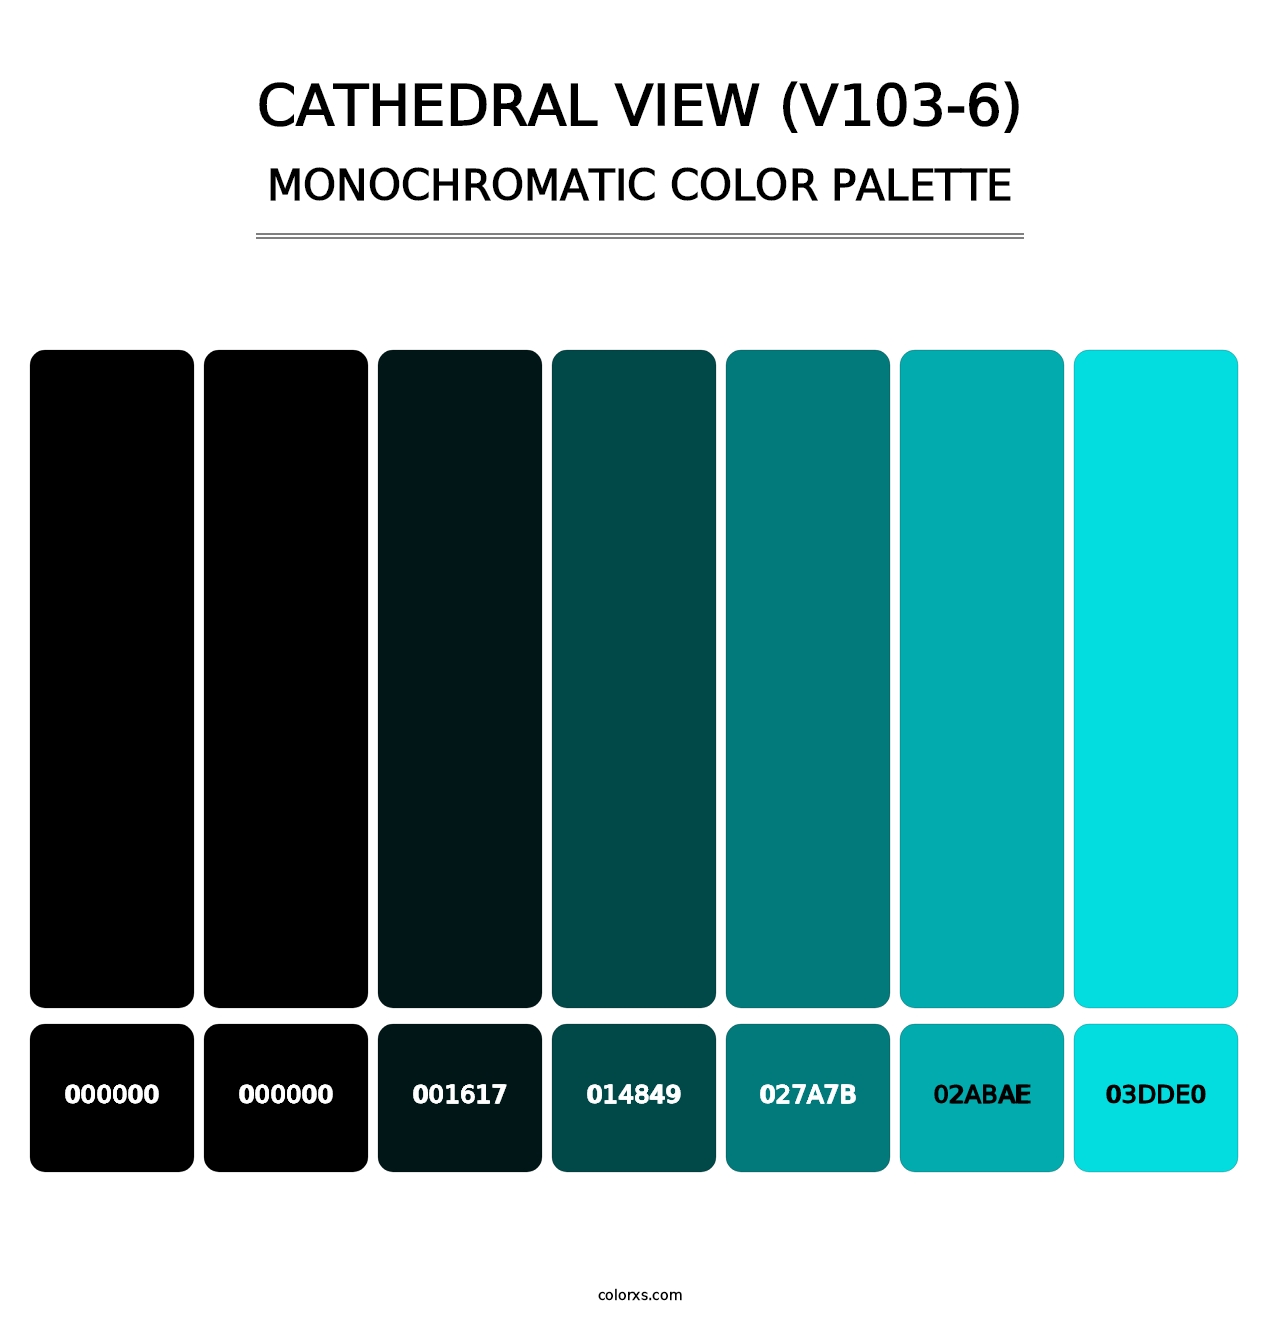 Cathedral View (V103-6) - Monochromatic Color Palette